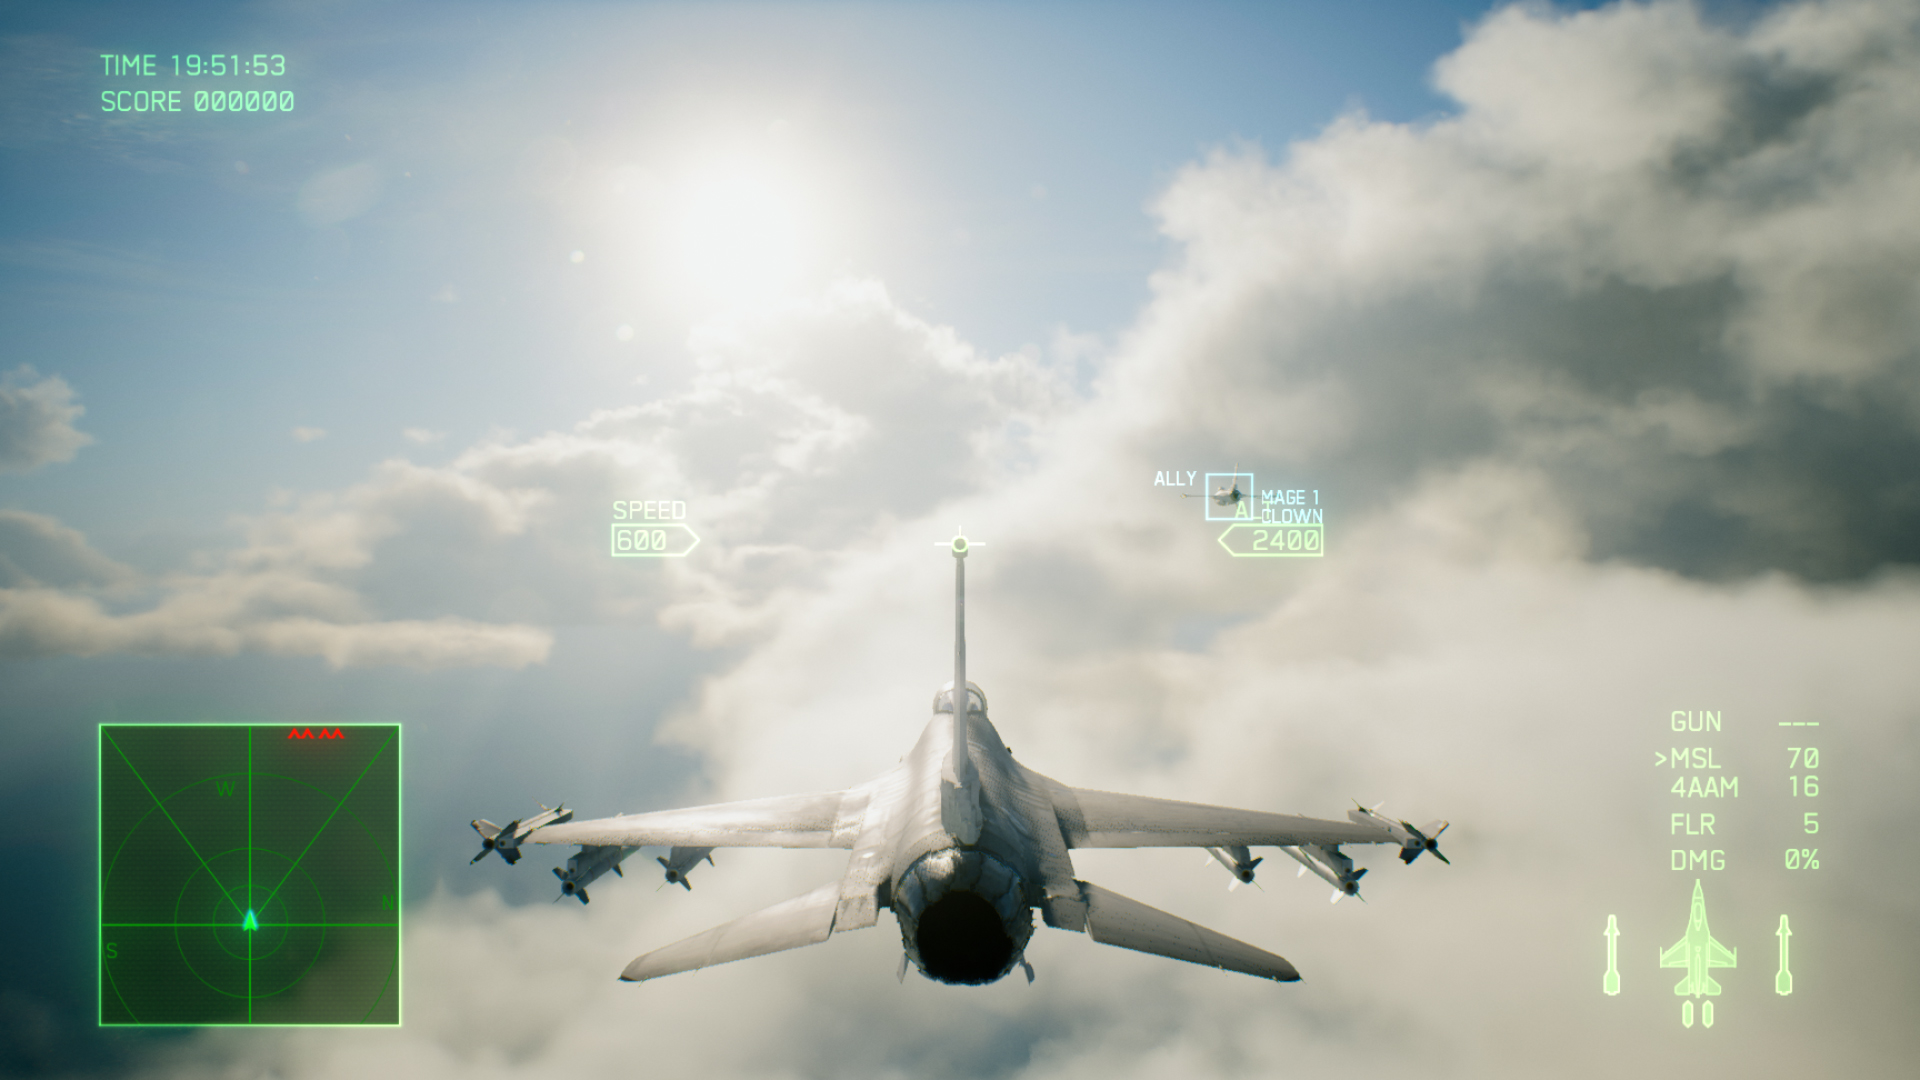 Save 80% on ACE COMBAT™ 7: SKIES UNKNOWN on Steam